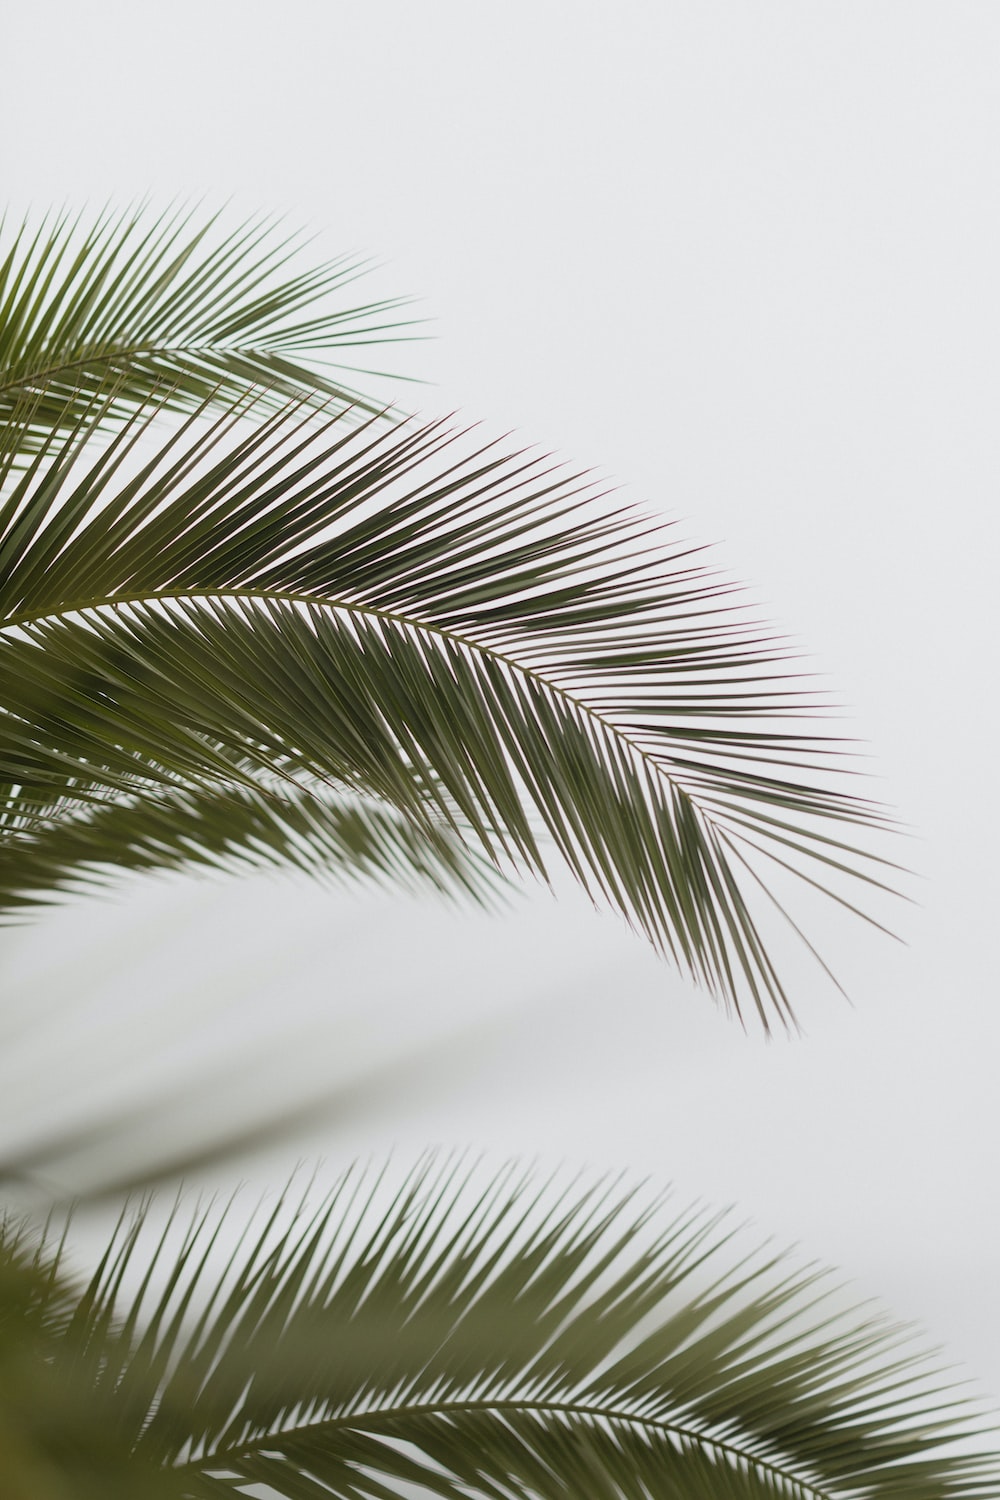 Palm tree pictures hd download free images on